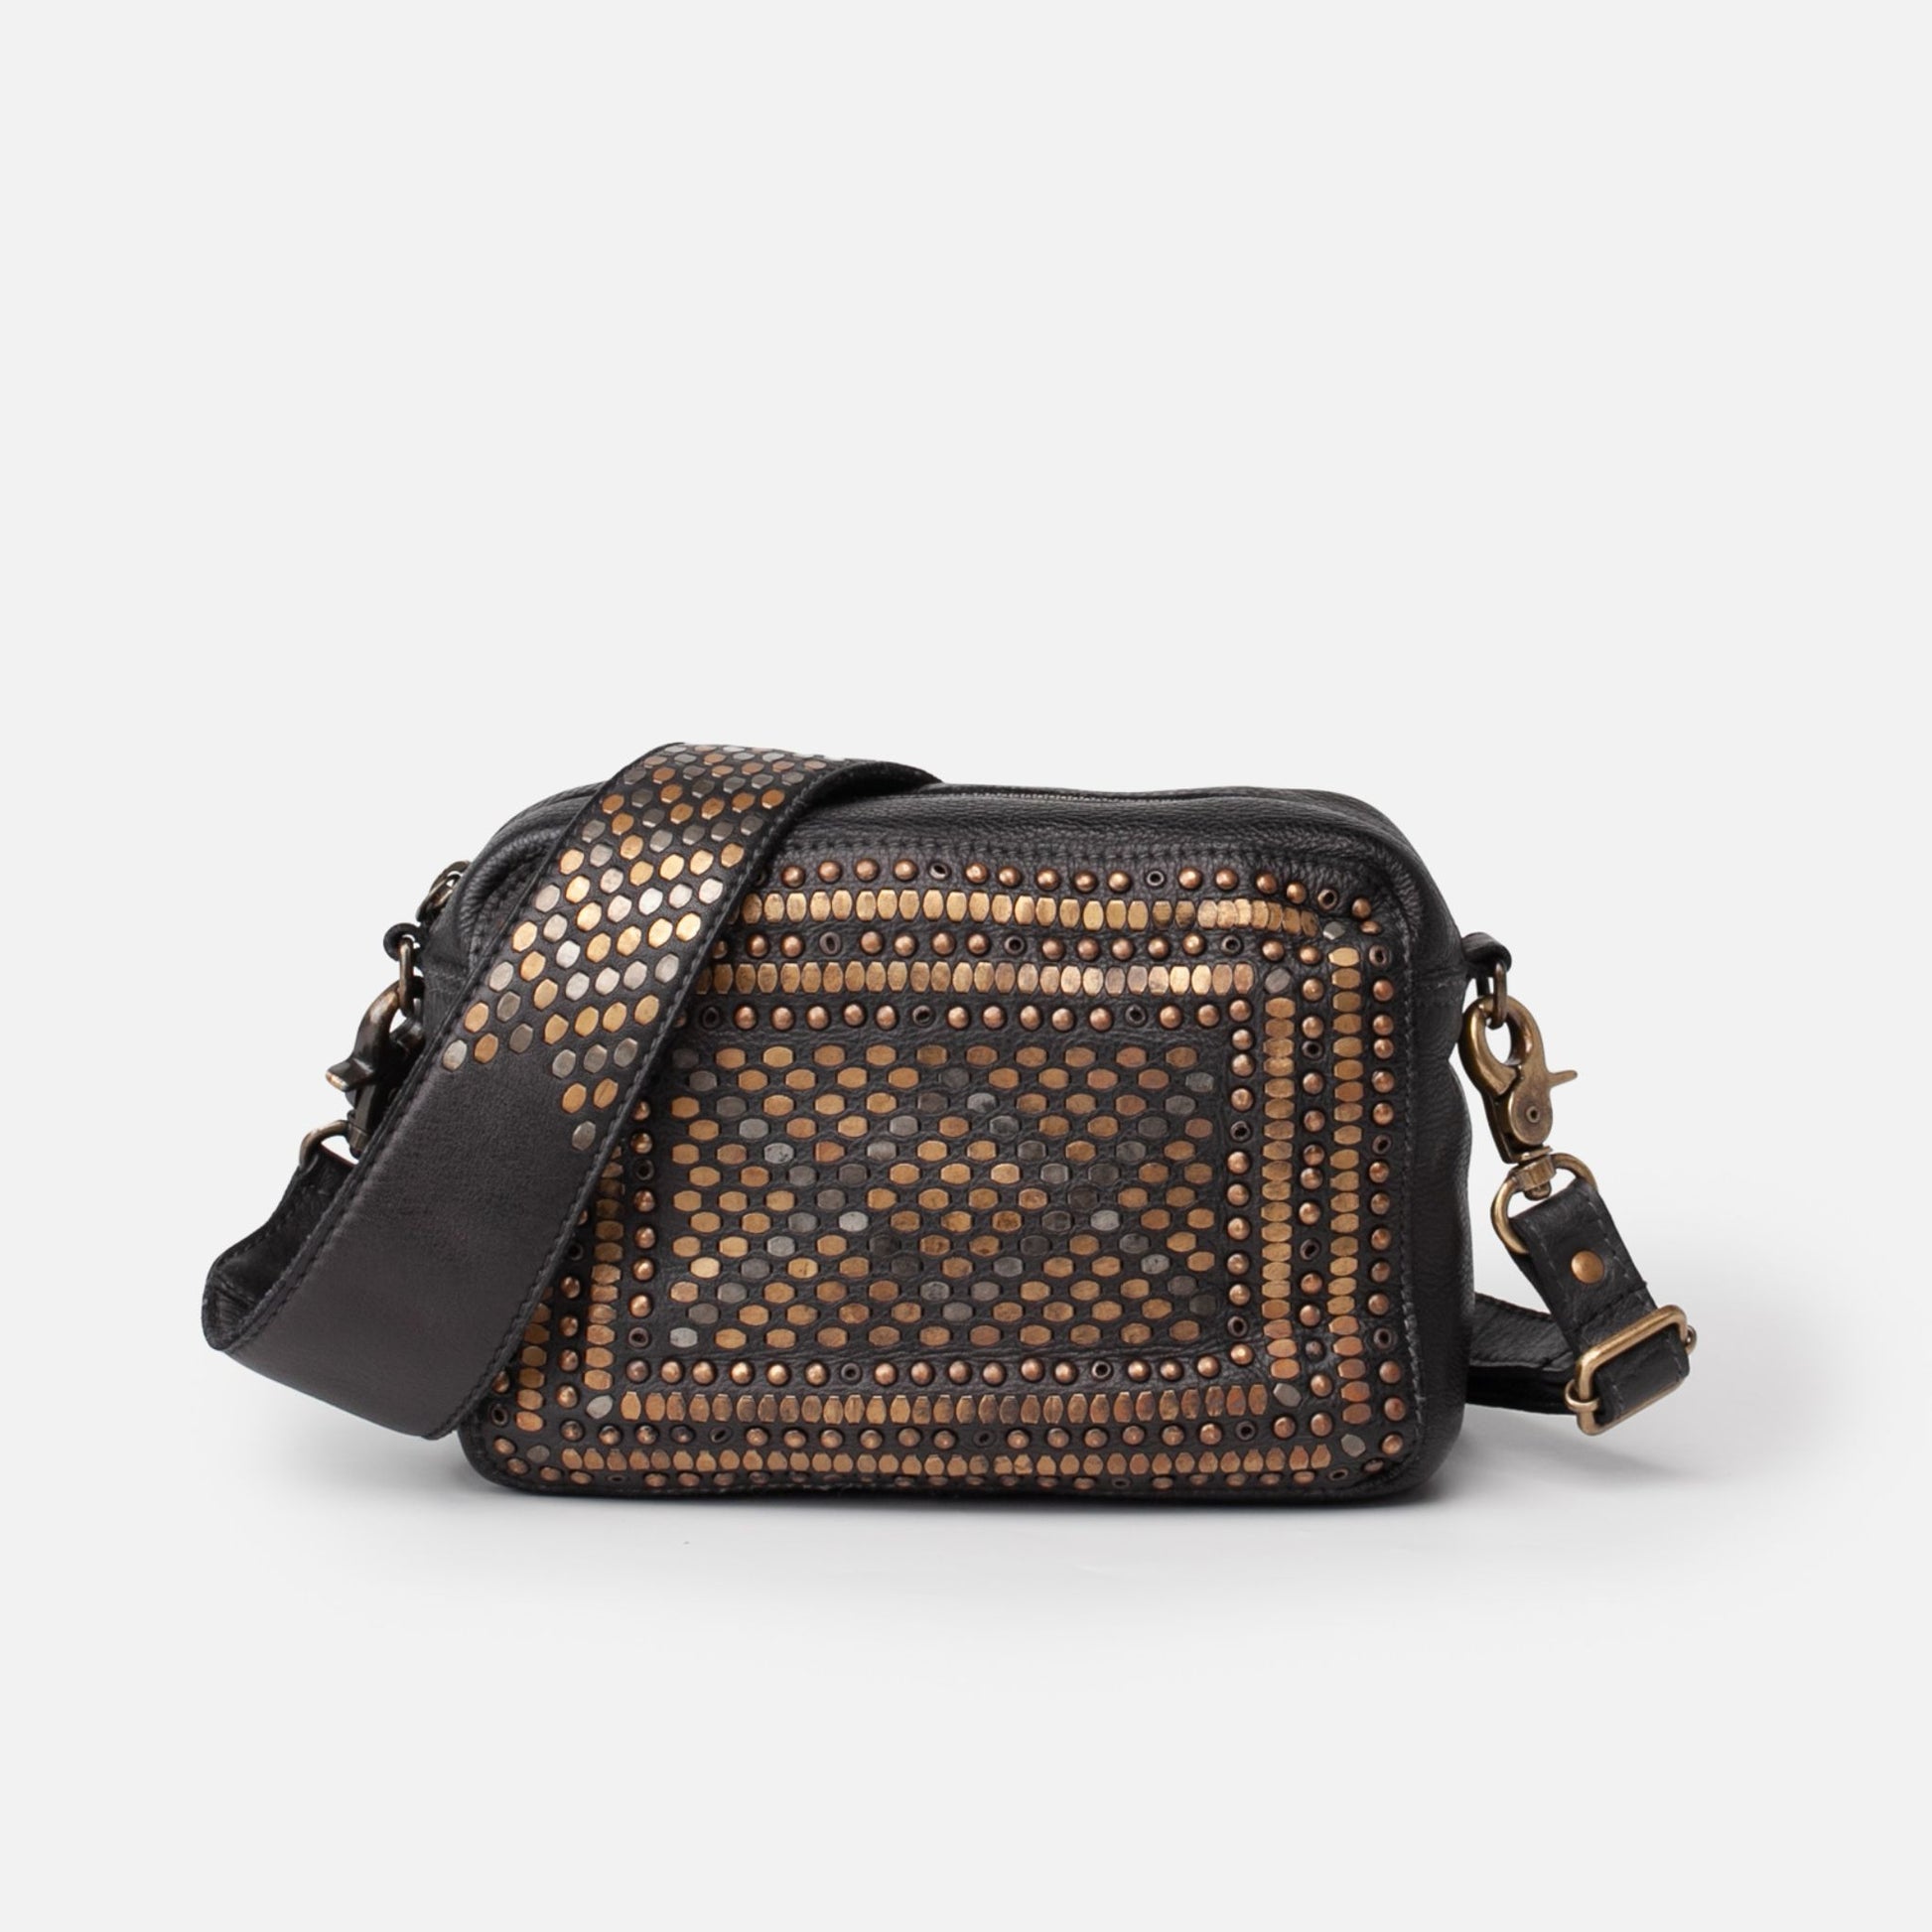 Scott-Samuel woven leather crossbody bag in black with intricate detailing, shown on a white background